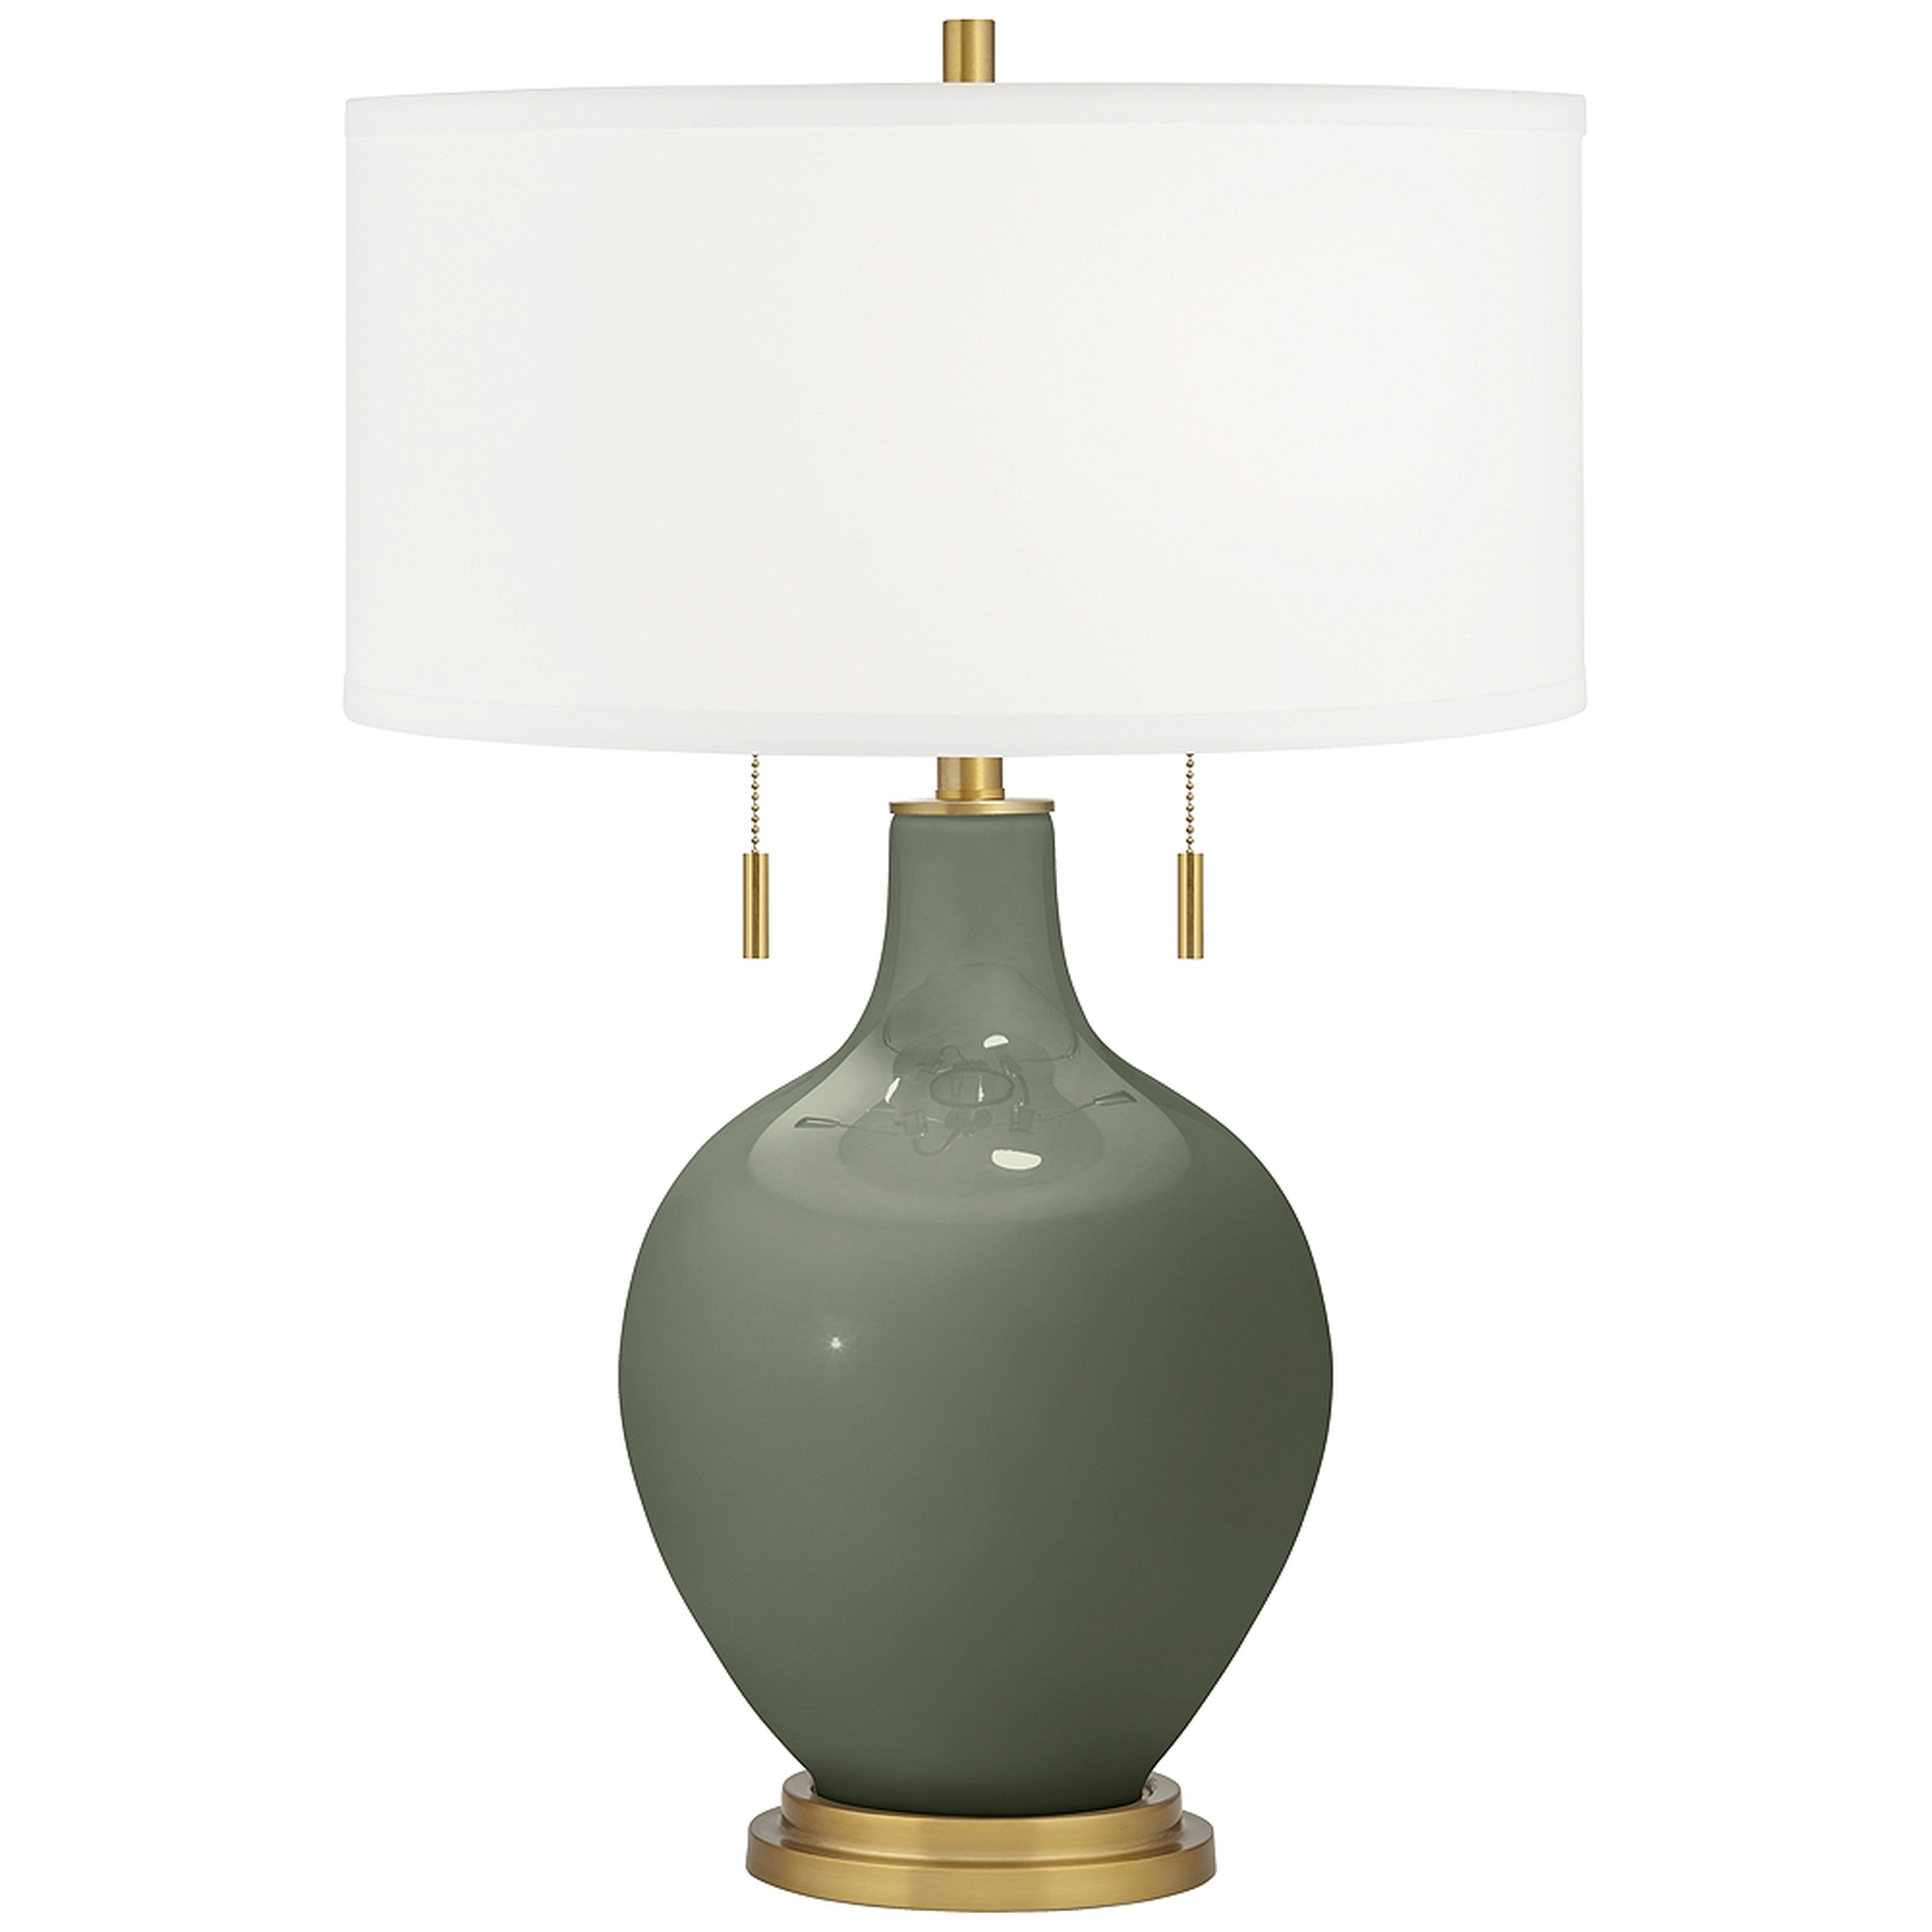 Deep Lichen Green Toby Brass Accents Table Lamp - Style # 95R90 - Lamps Plus